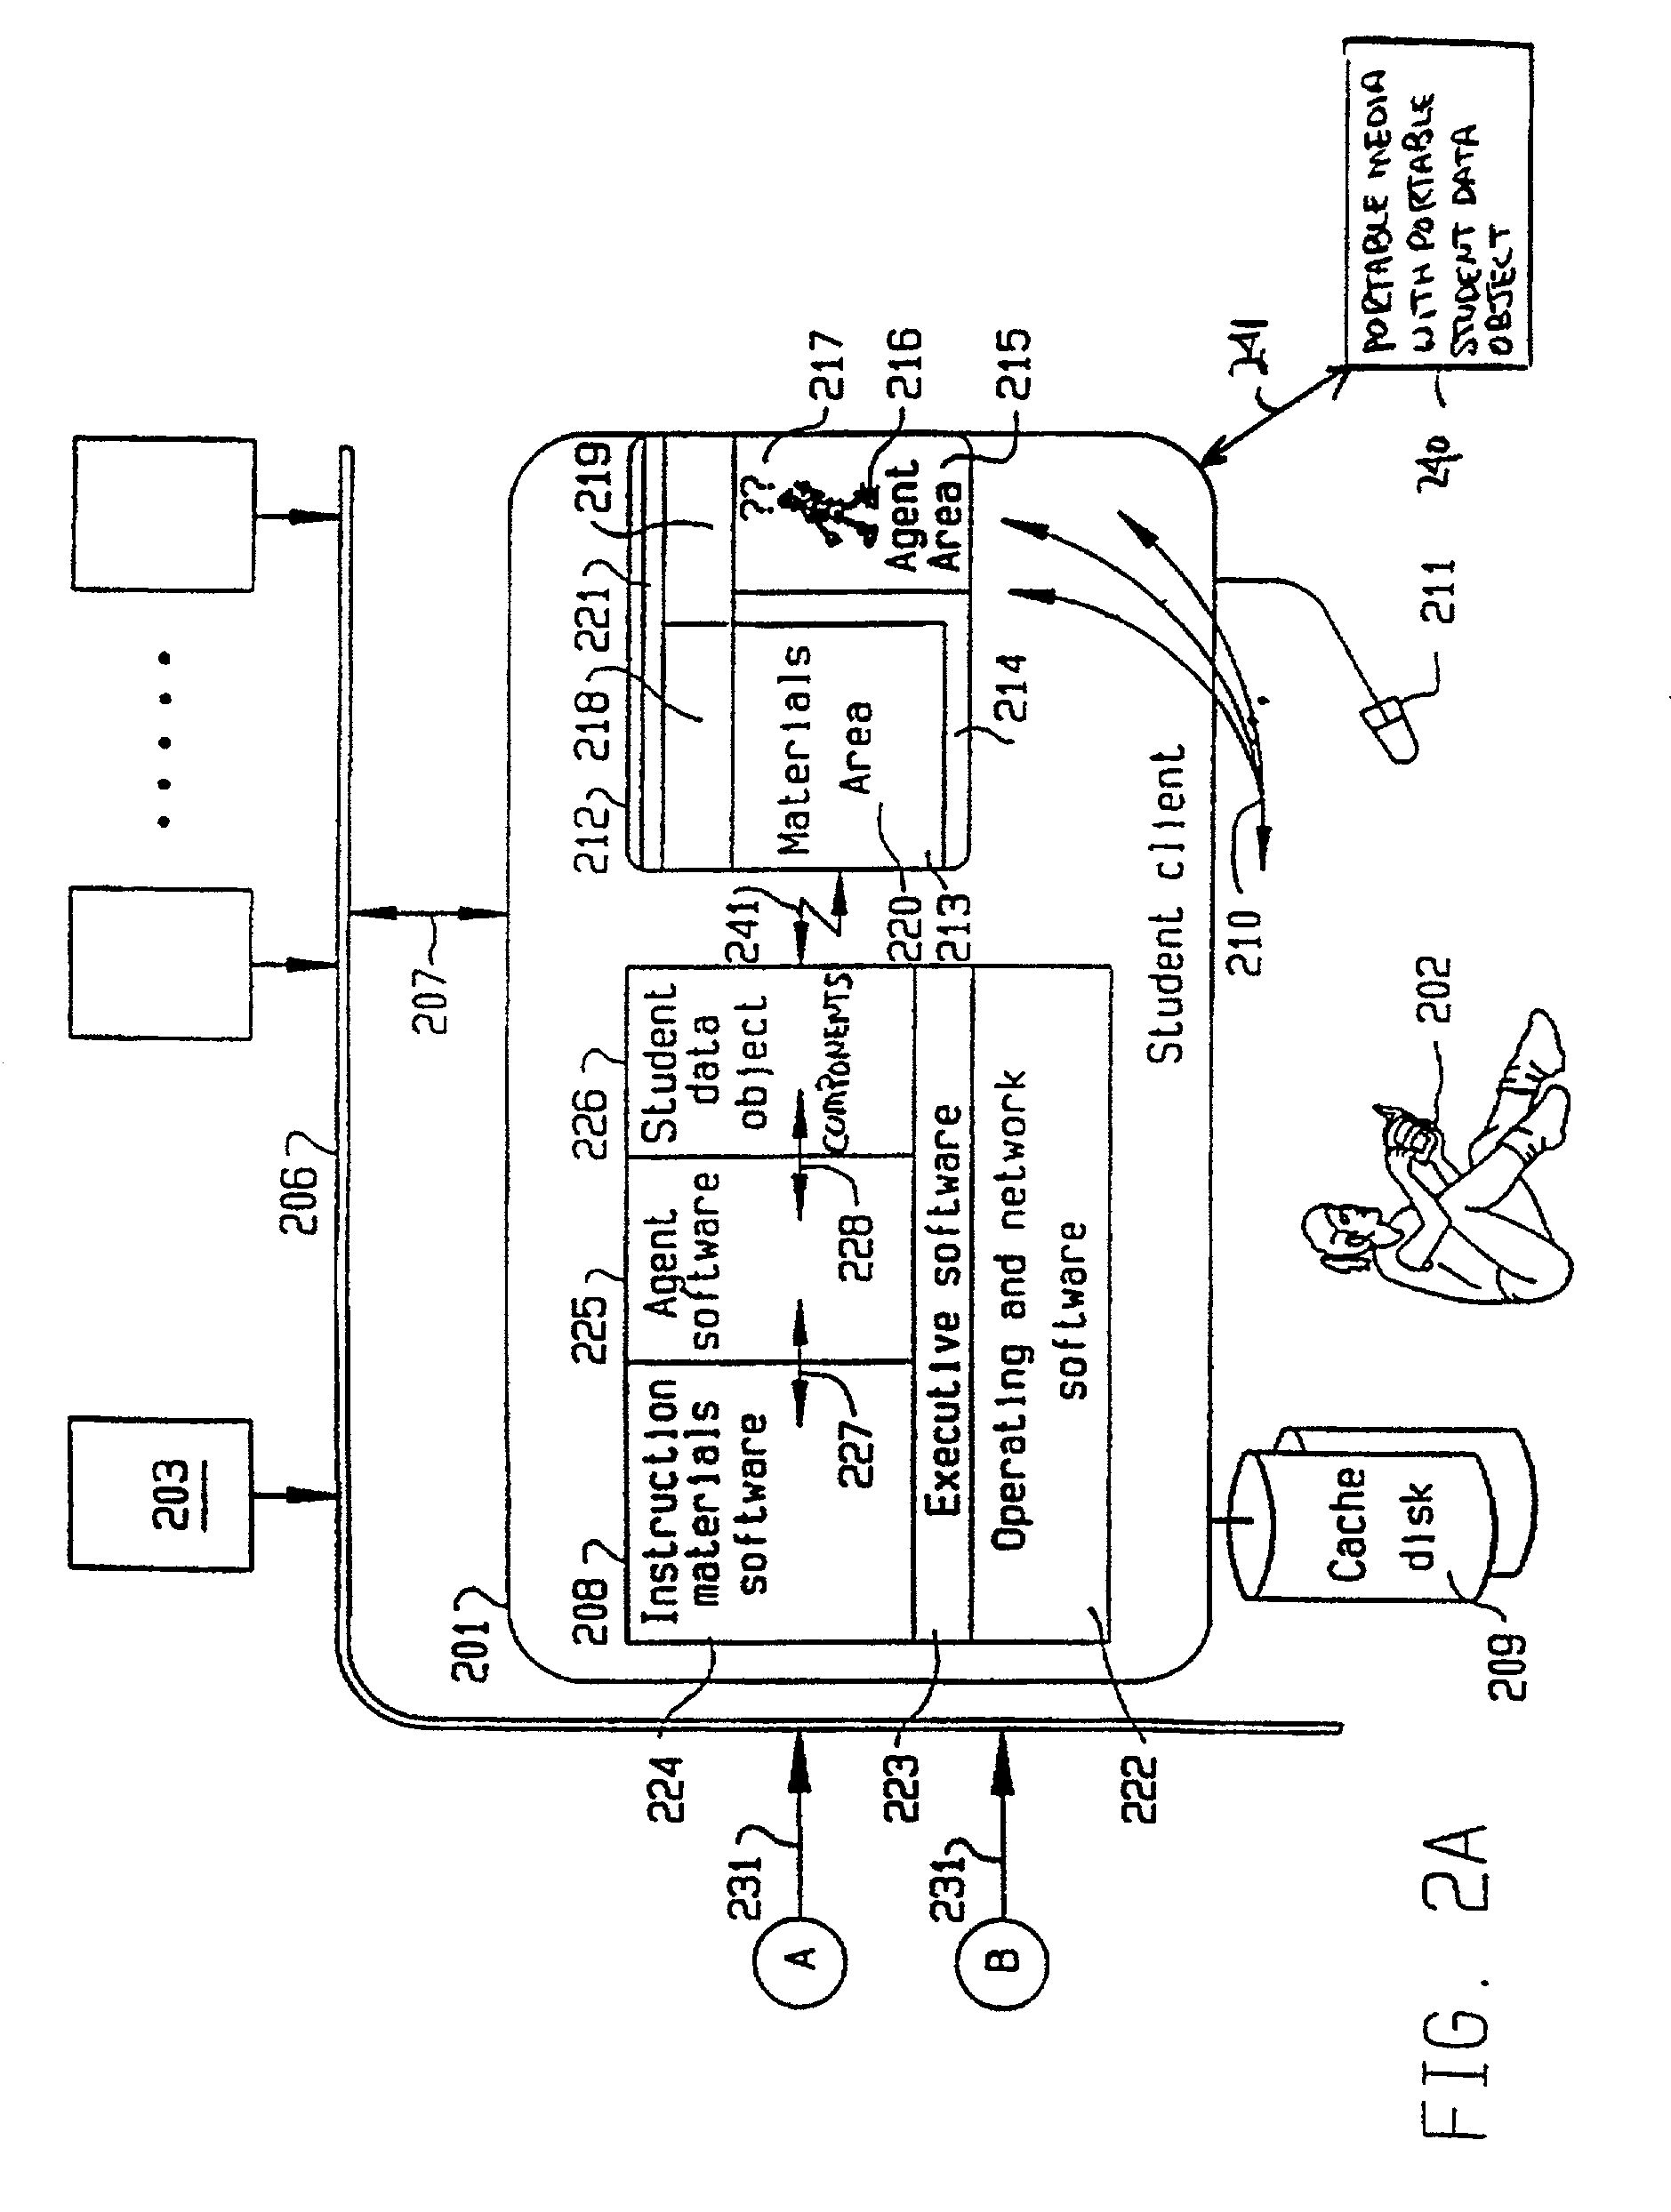 Agent based instruction system and method